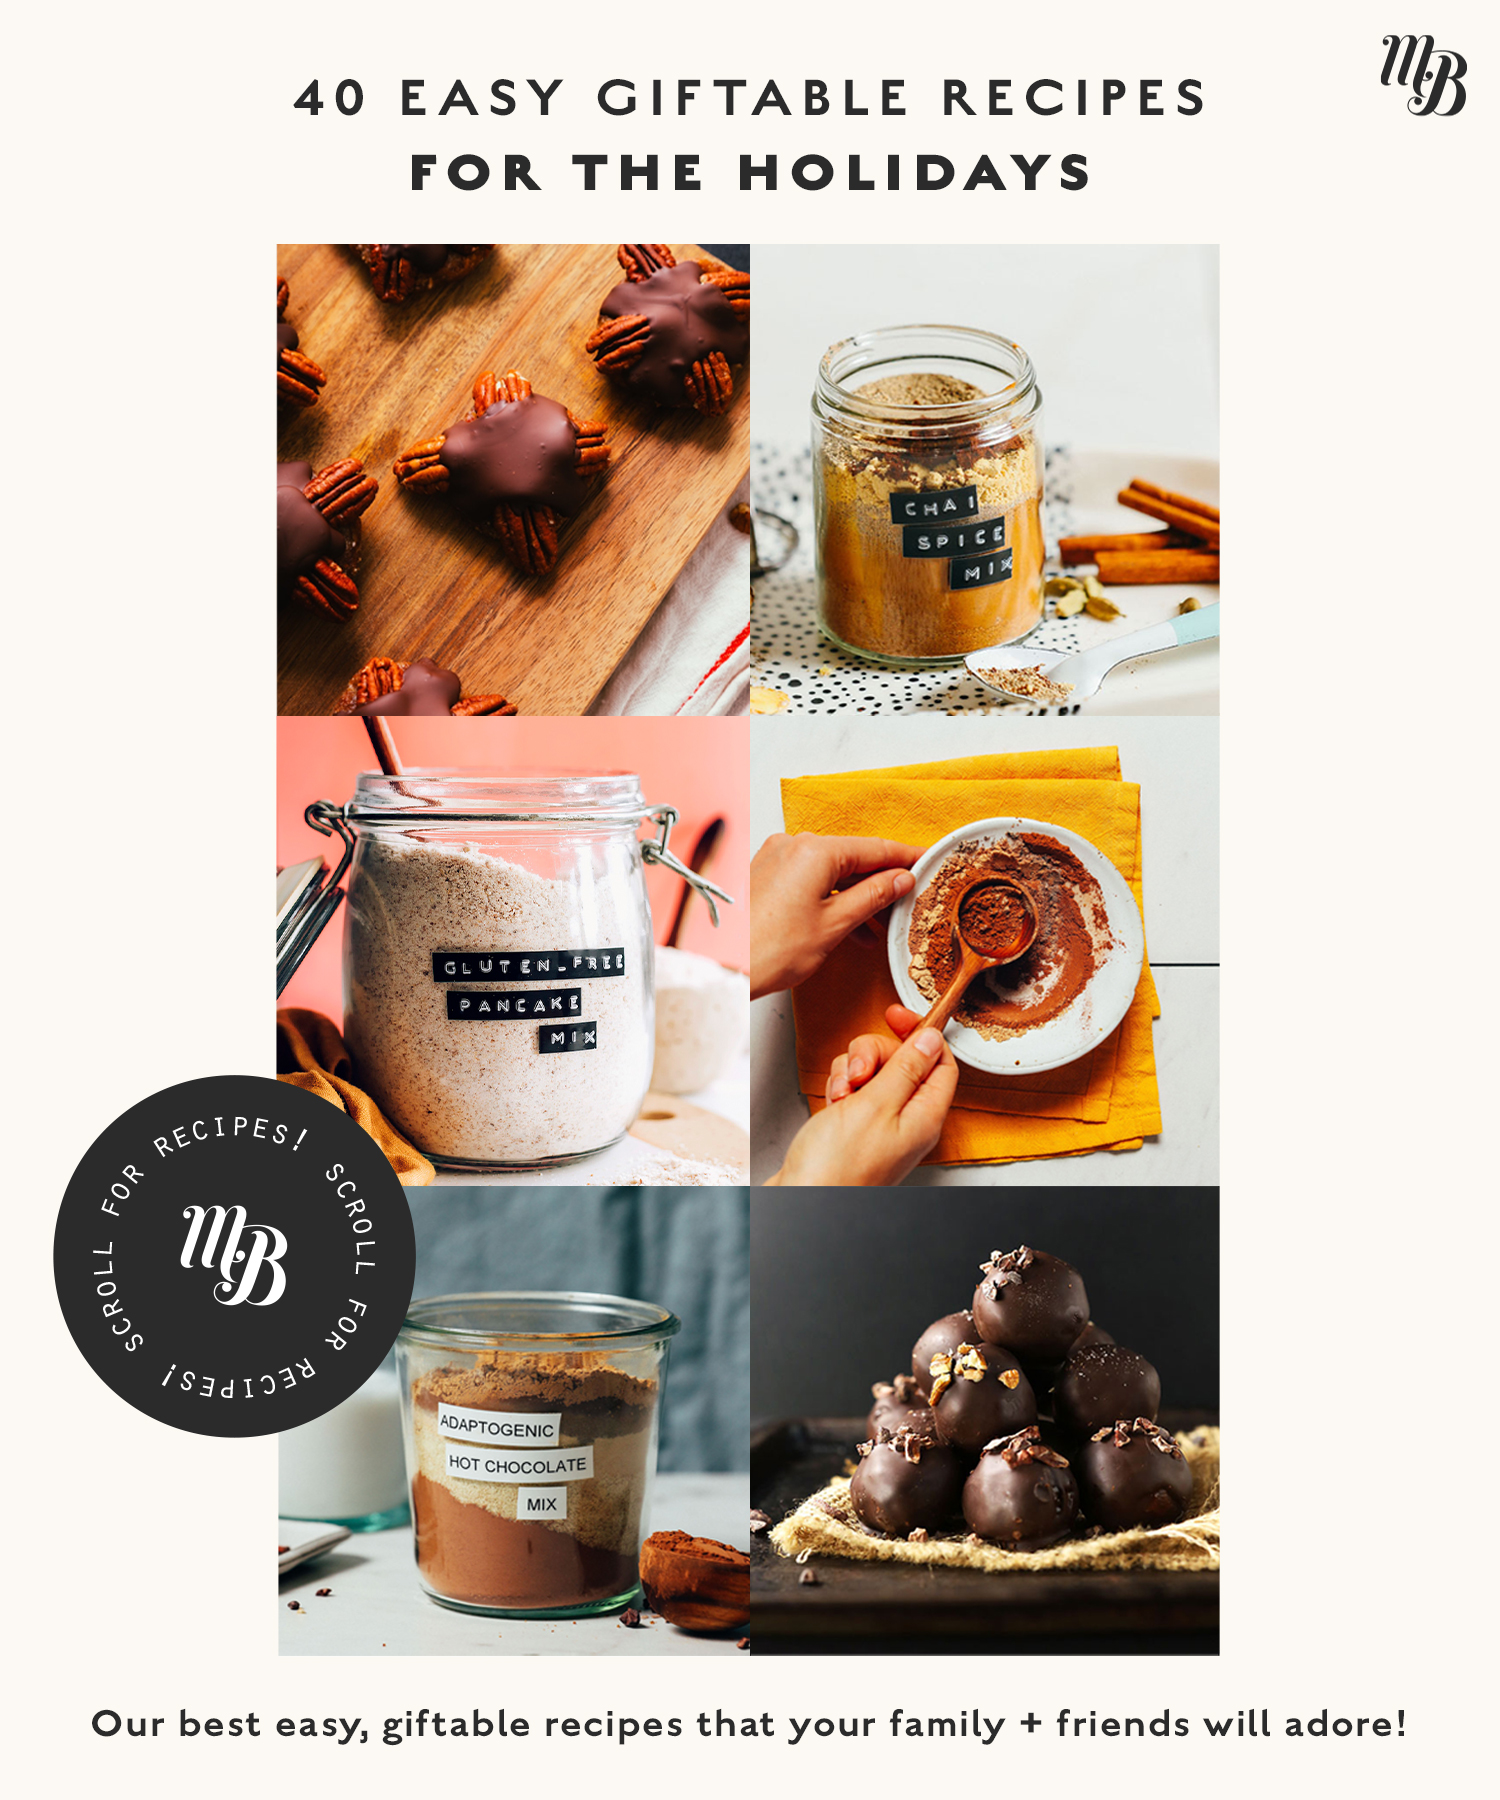 Assortment of easy giftable recipes for the holidays